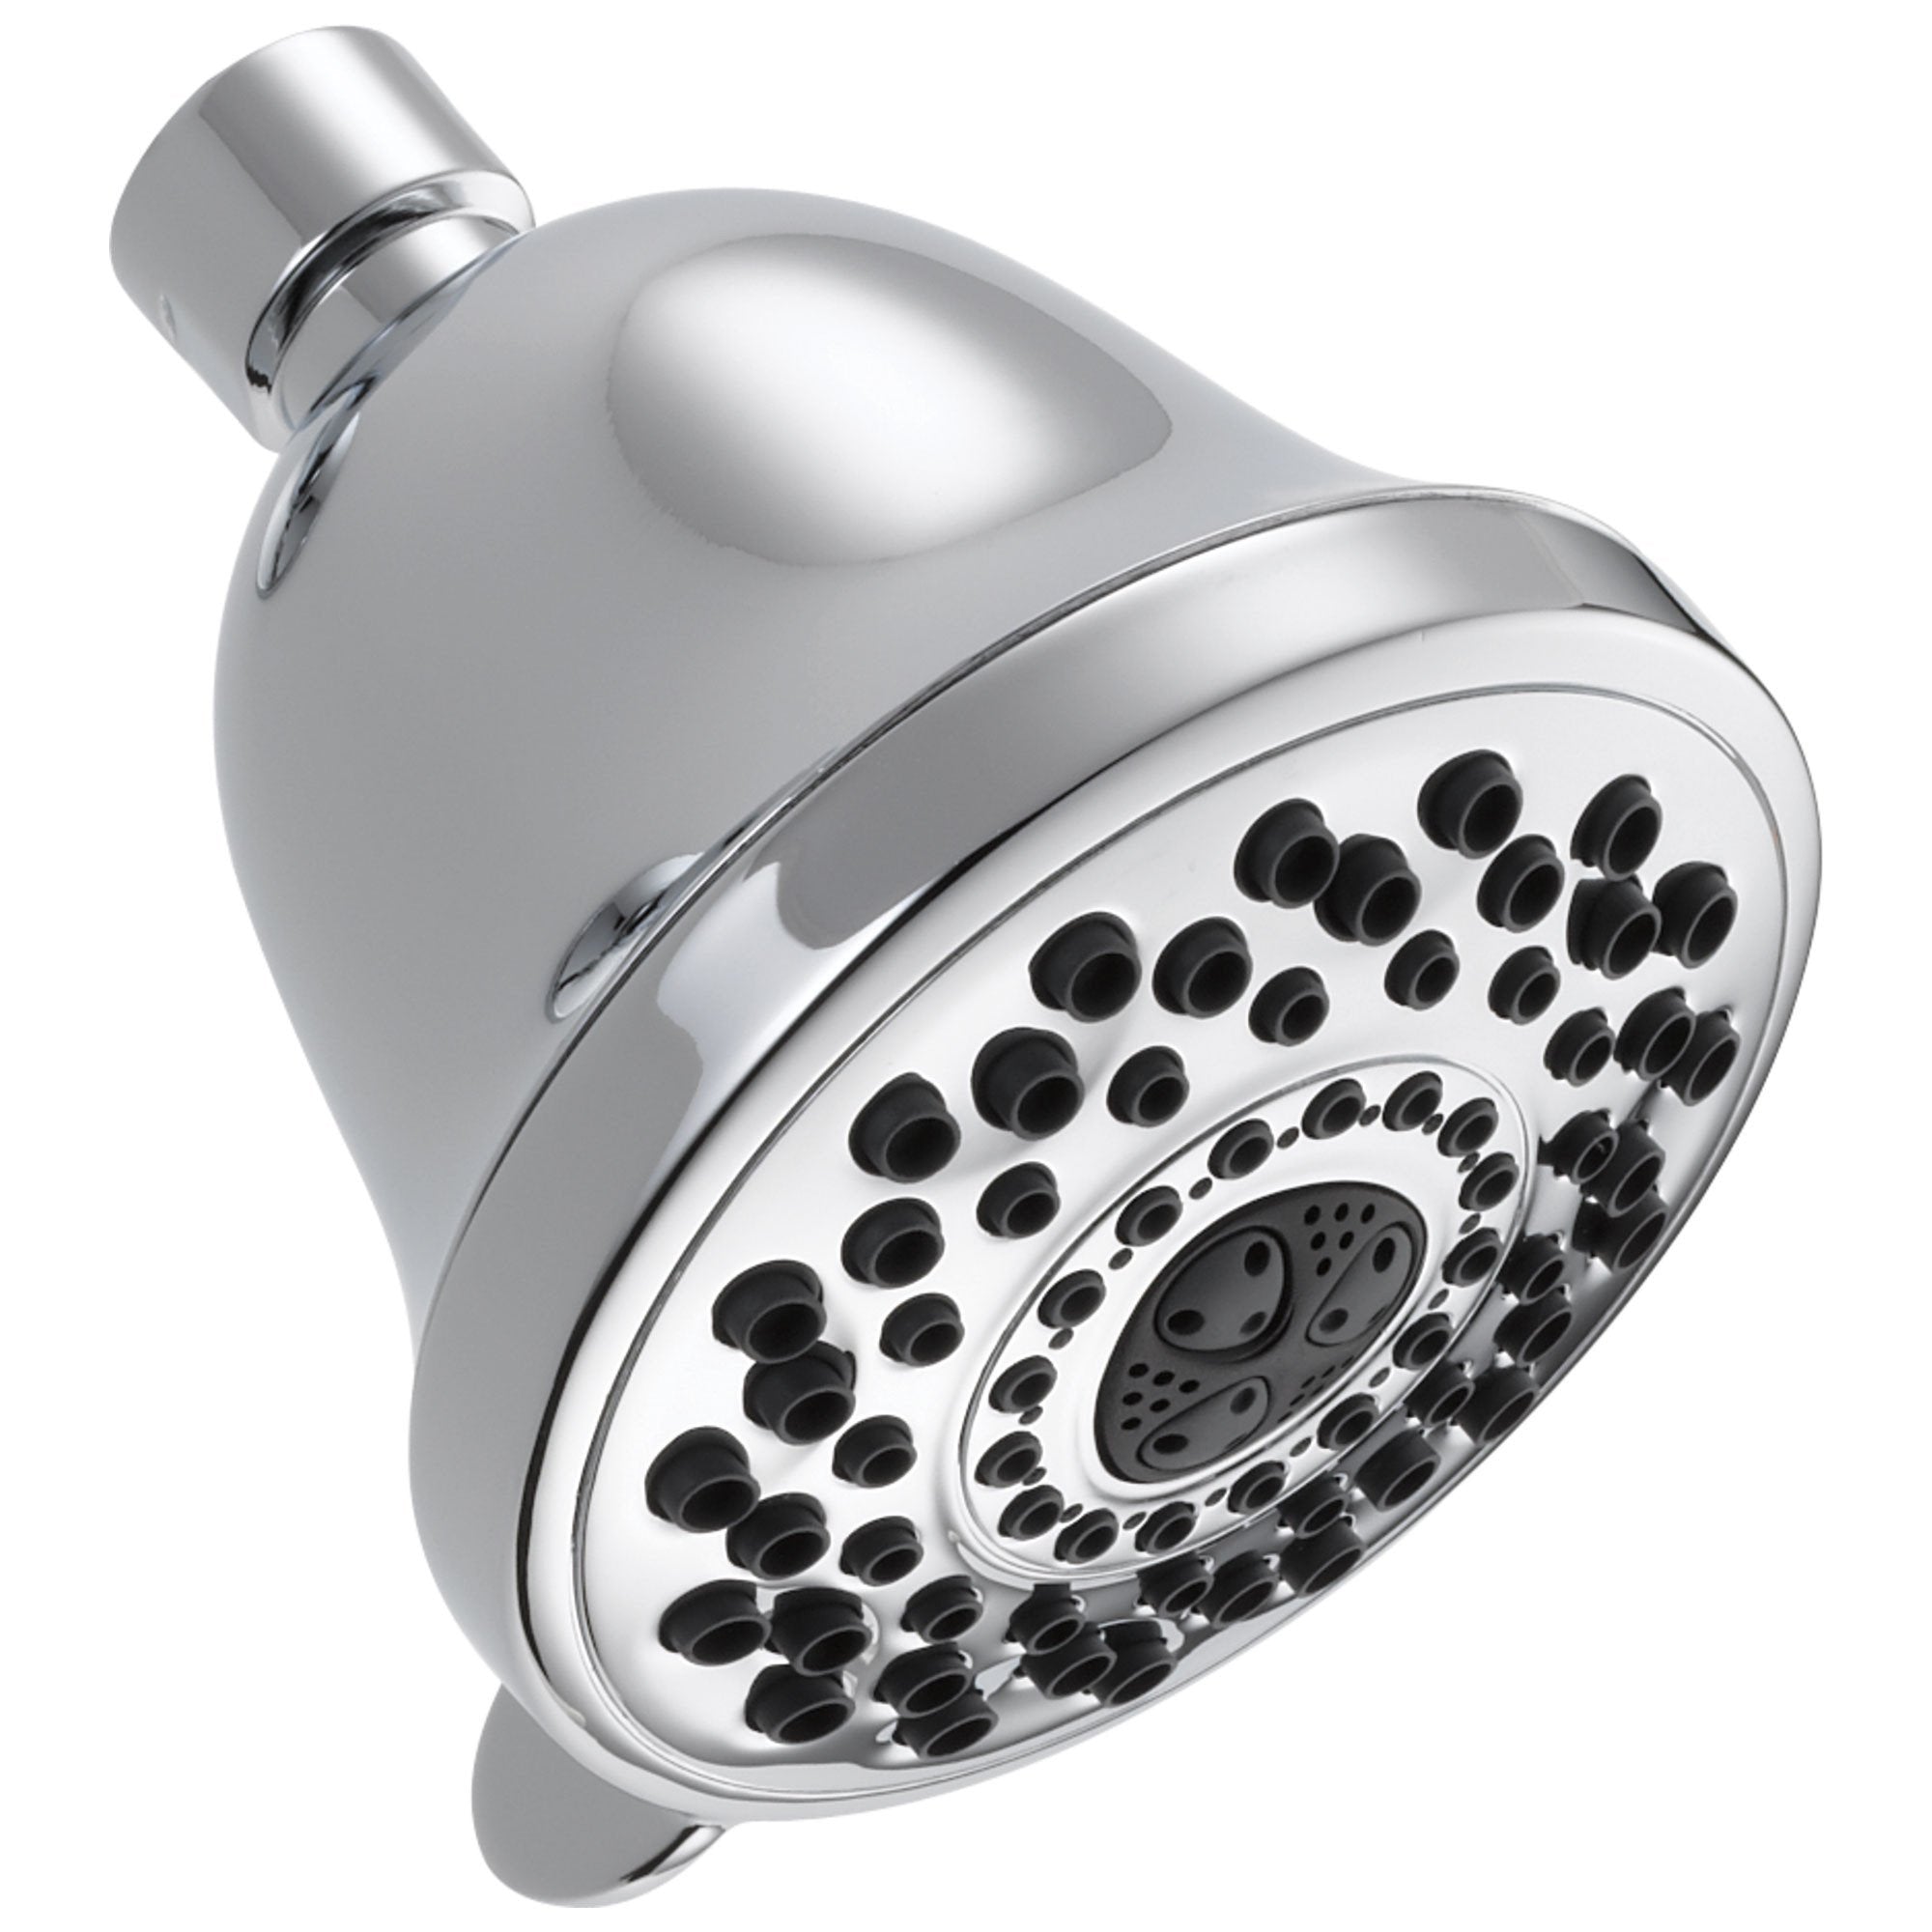 Delta Universal Showering Components Collection Chrome Finish 7-Setting Shower Head 737175